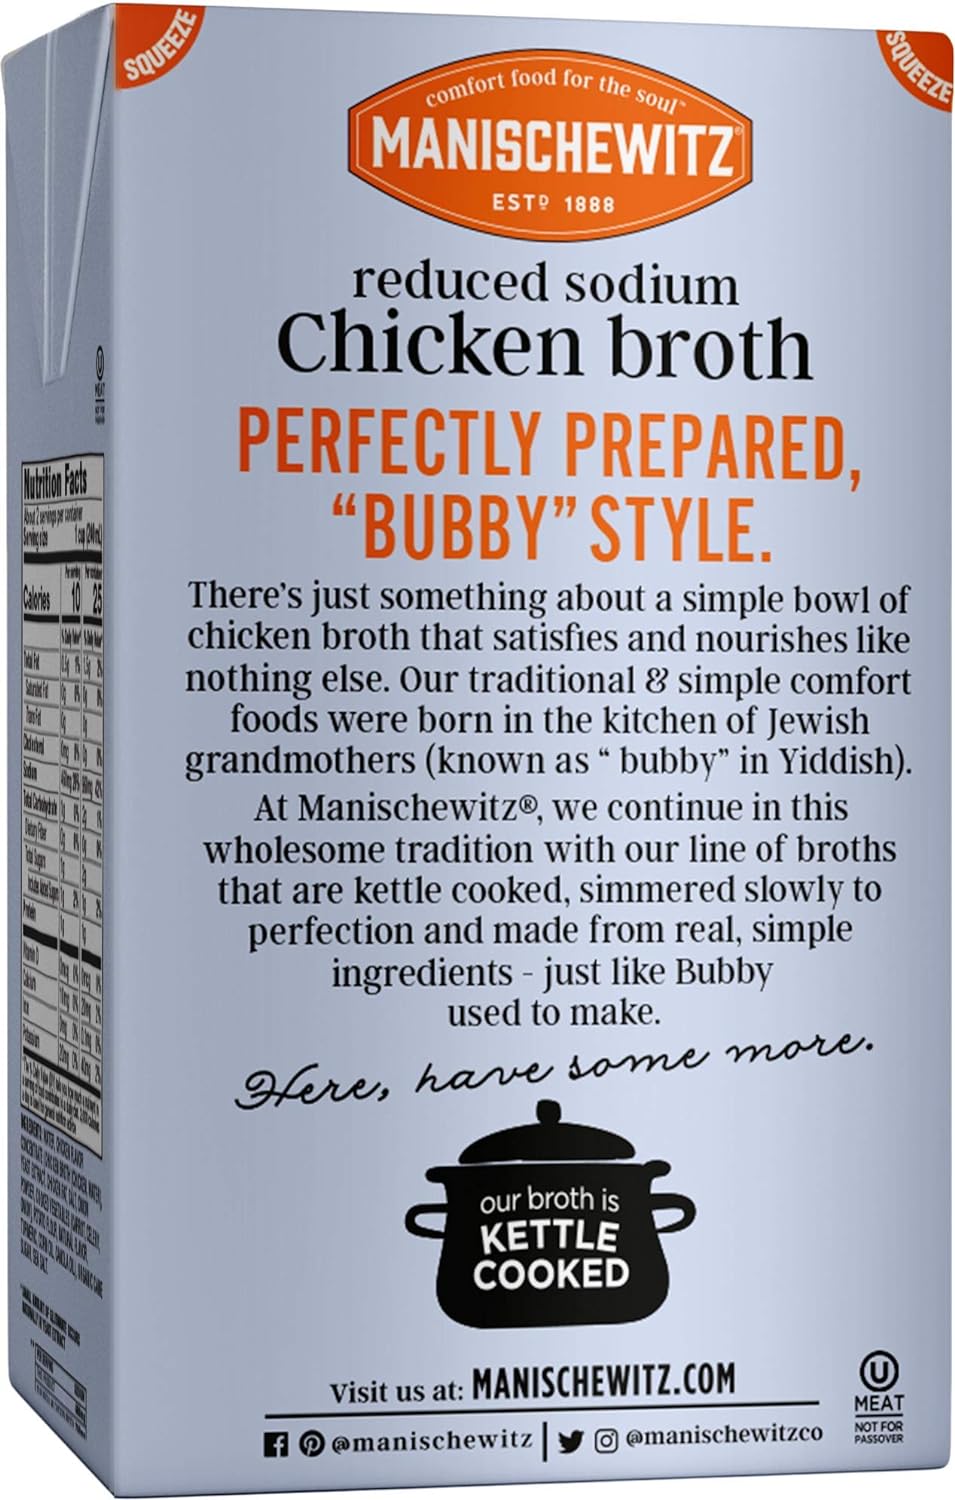 Manischewitz Reduced Sodium Chicken Broth 17oz (3 Pack), Flavorful, Kettle Cooked, Slowly Simmered : Grocery & Gourmet Food